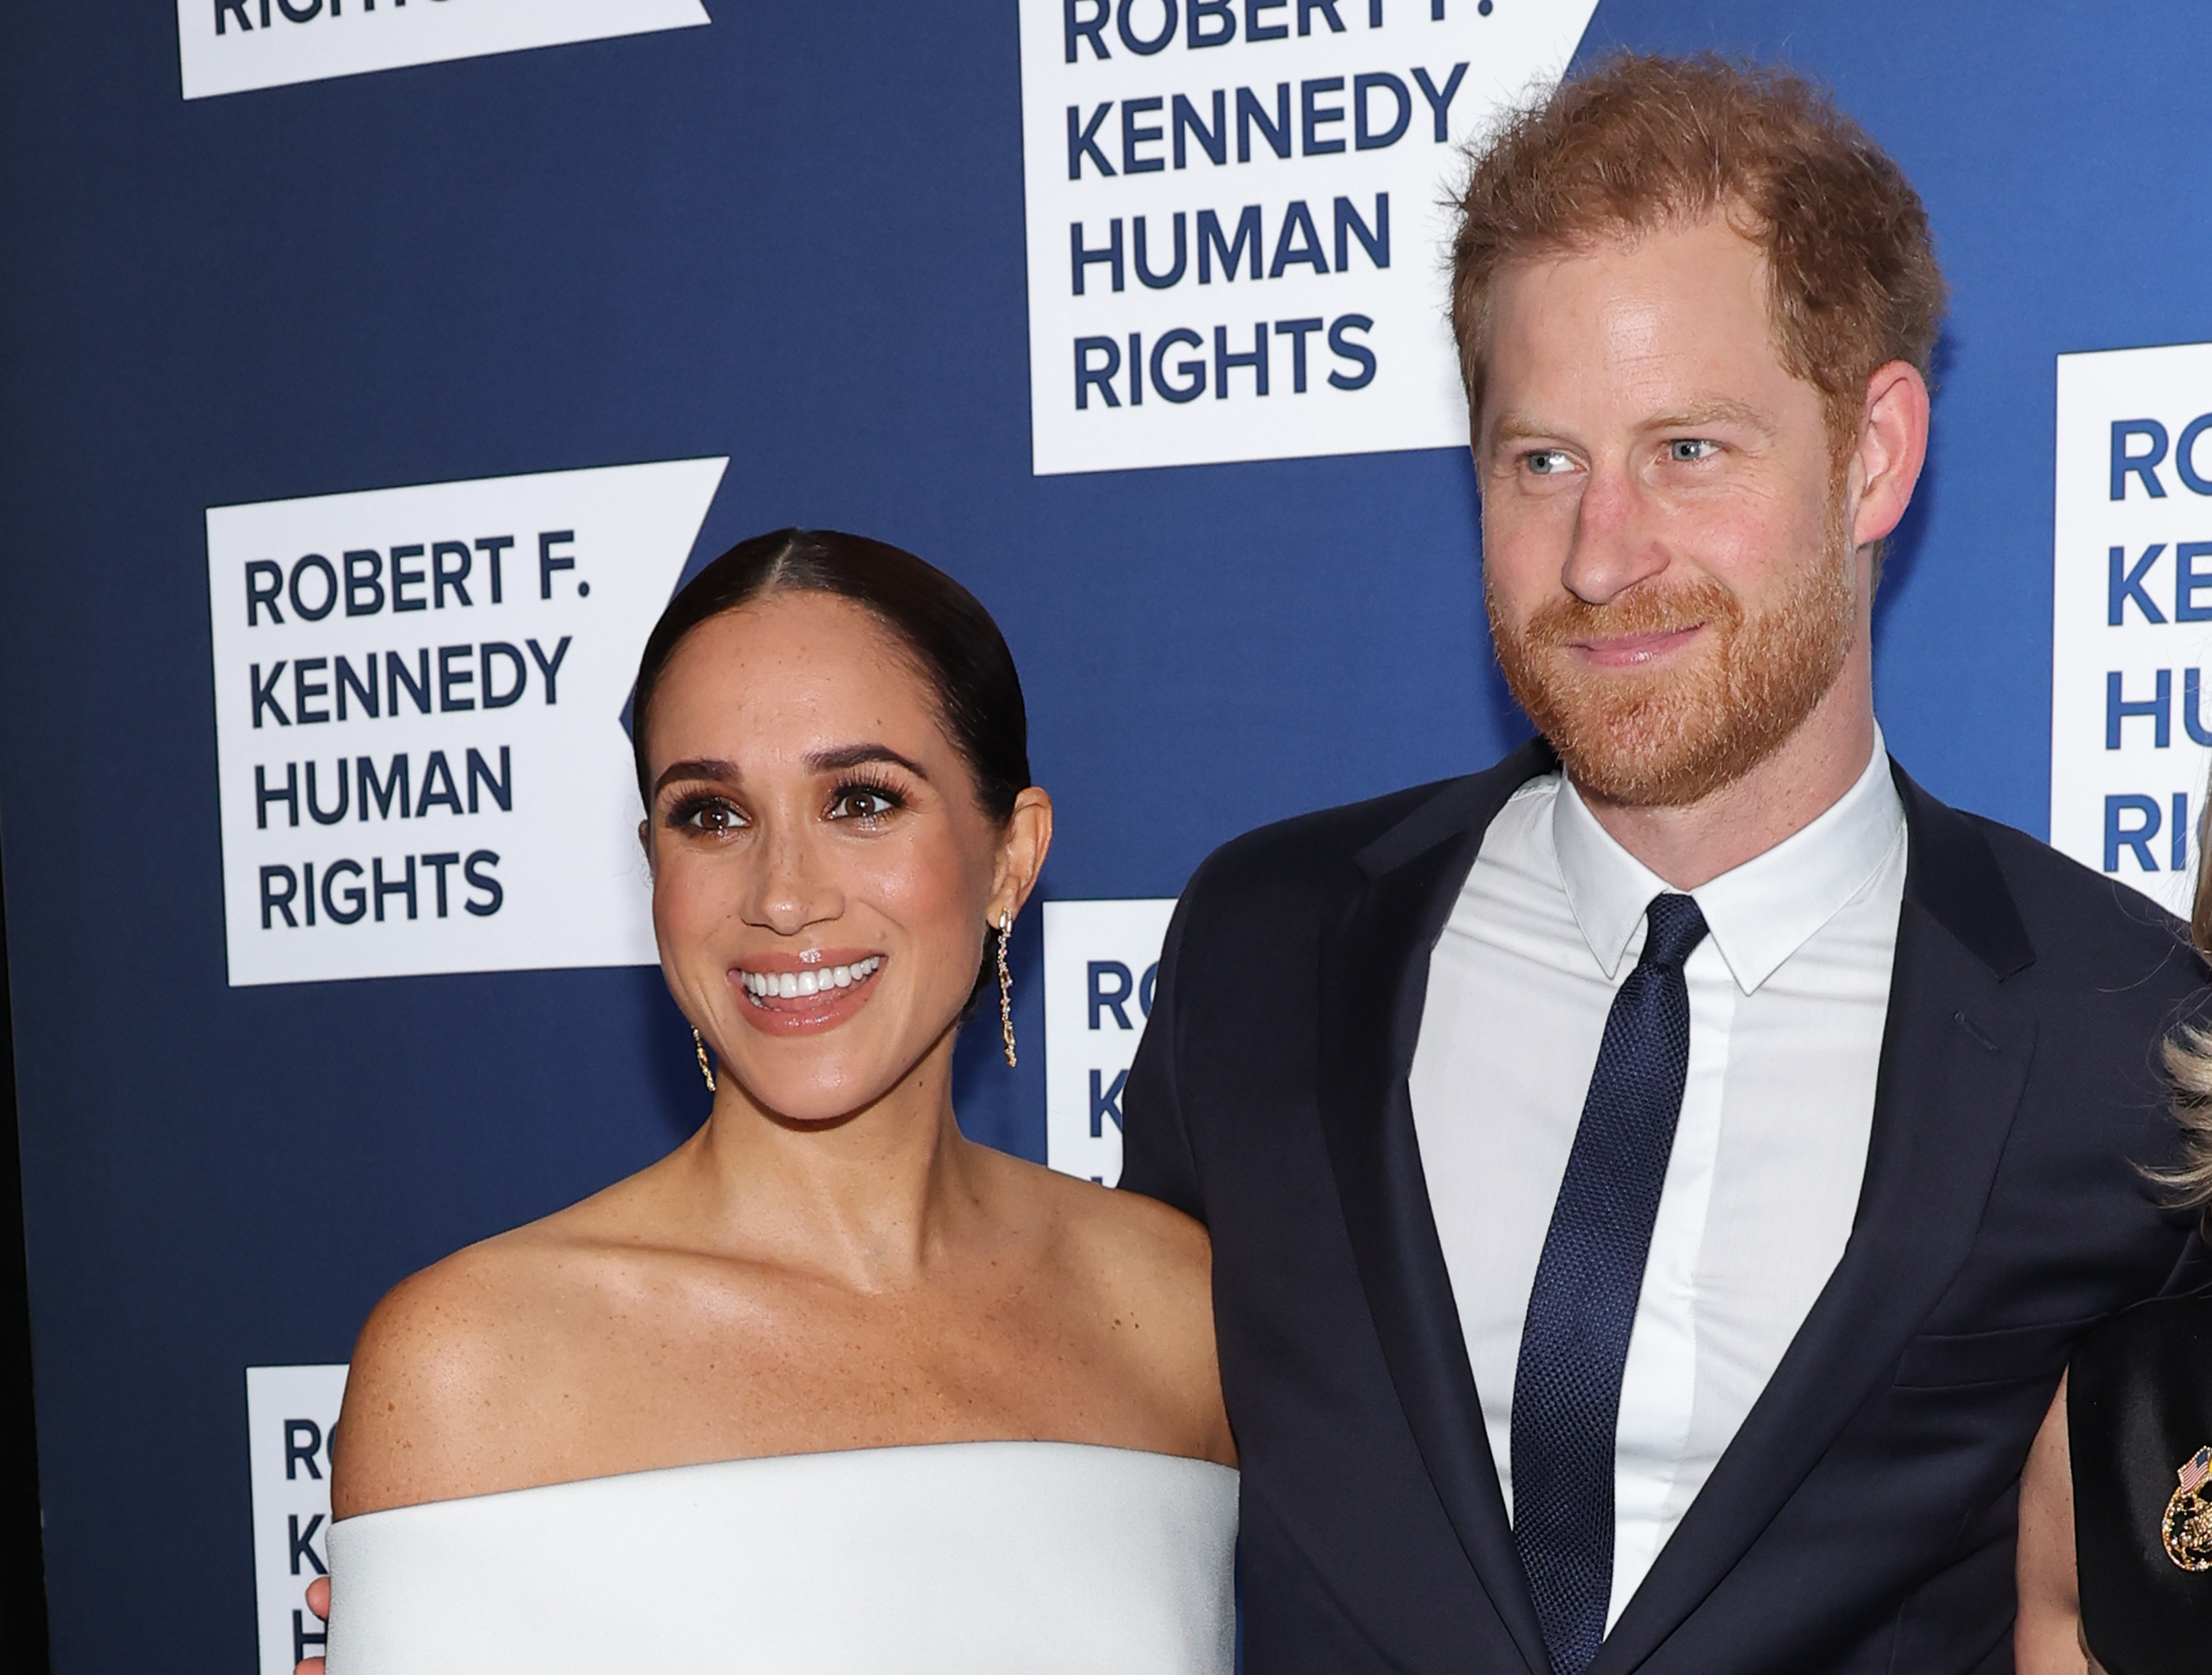 Duchess Meghan and Prince Harry at the Robert F. Kennedy Human Rights Ripple of Hope Gala on December 6, 2022, in New York City | Source: Getty Images